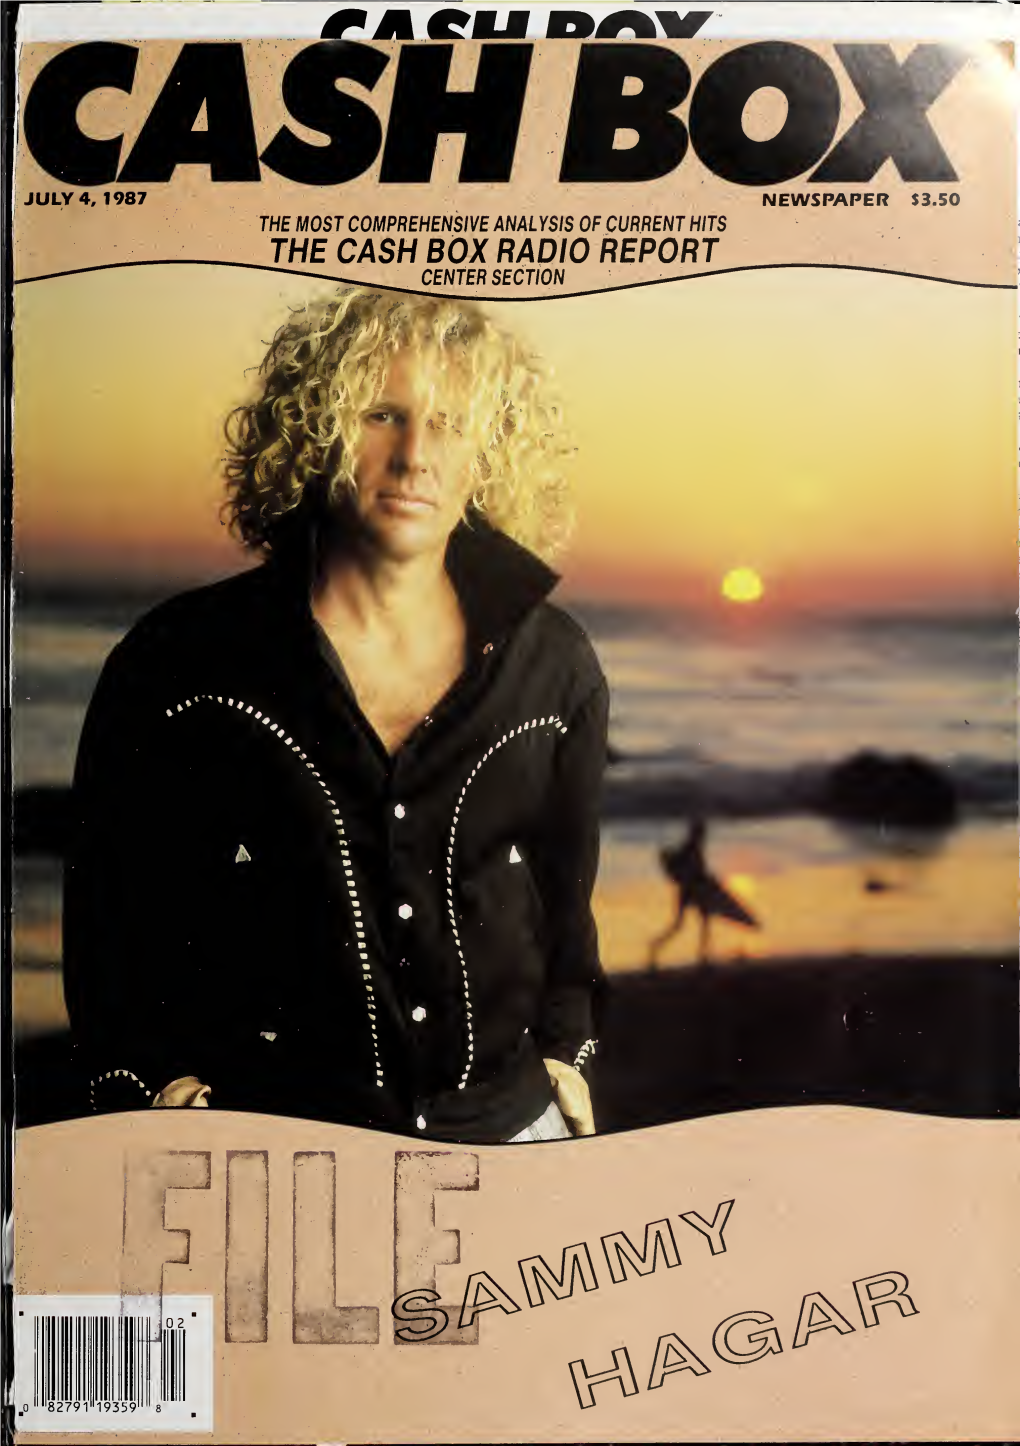 The Cash Box Radio Report Center Section